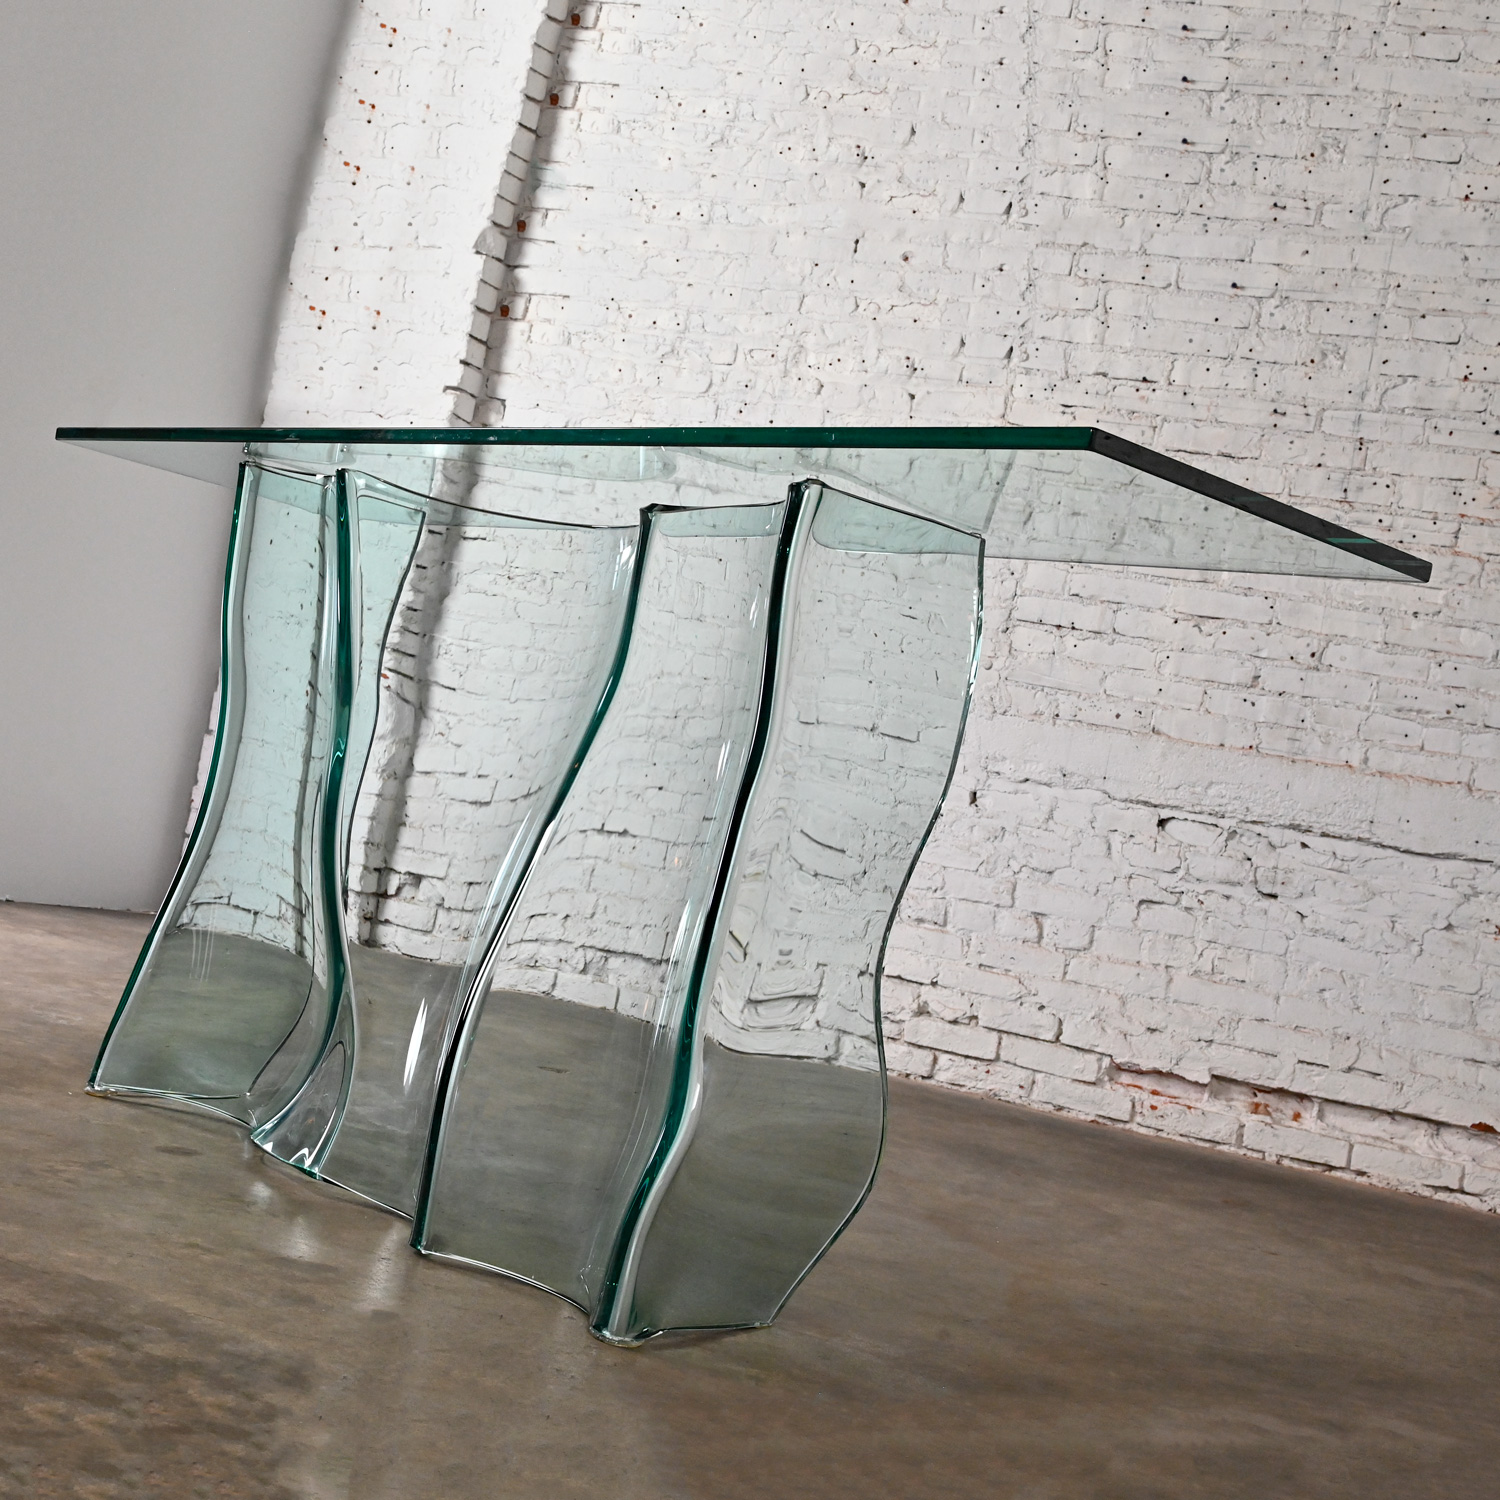 Late 20th Century Modern All Glass Sculptural Sofa or Console Table with Undulating Base